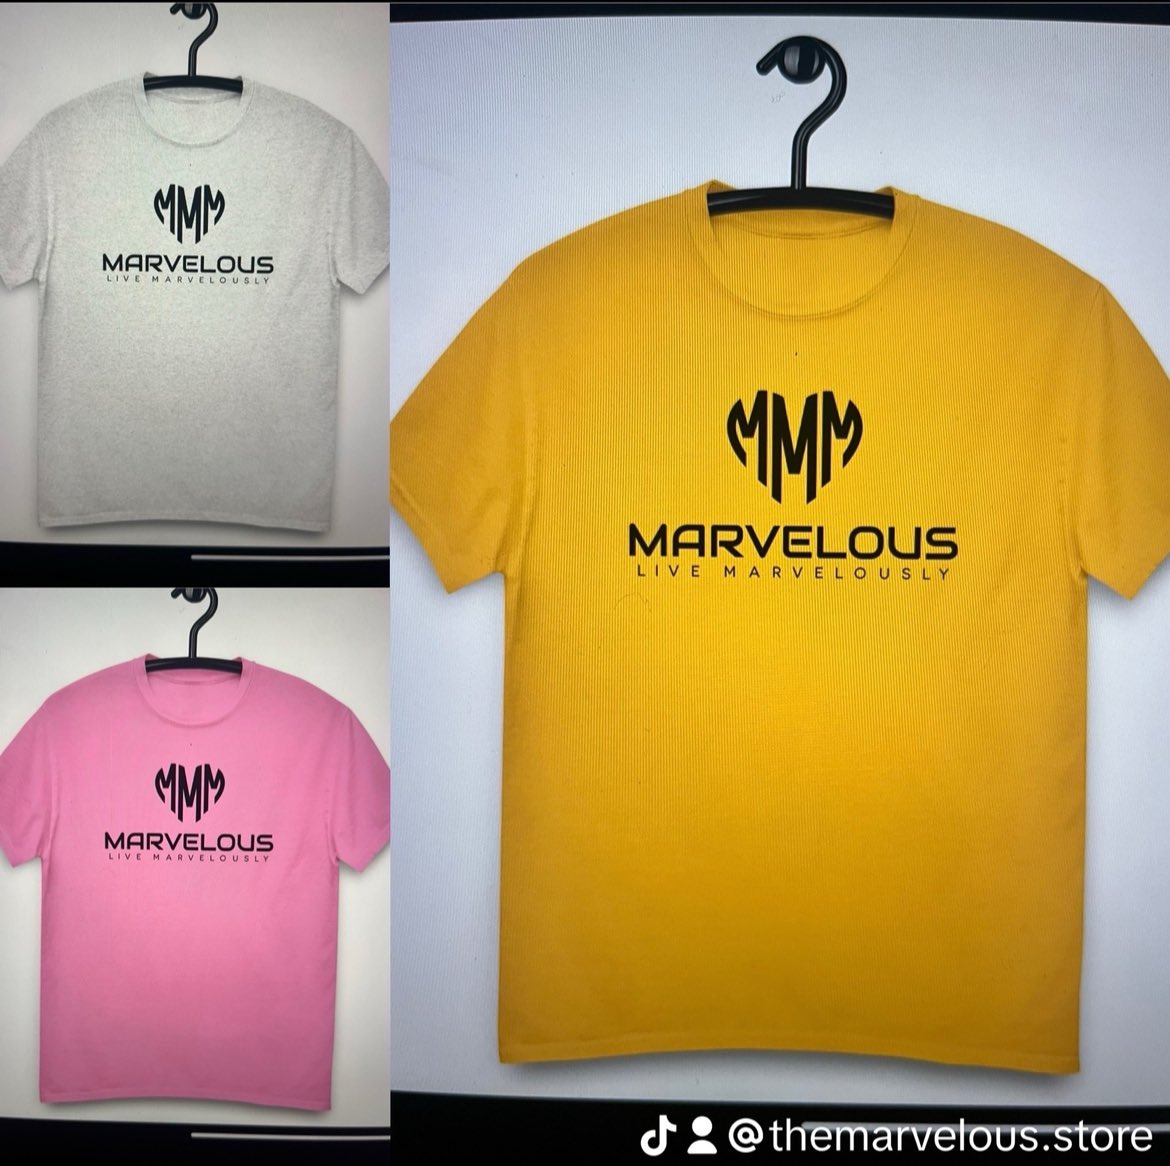 More branded Marvelous T-shirts from our themarvelous.store #onlinebusiness #onlinetshirts #livemarvelously